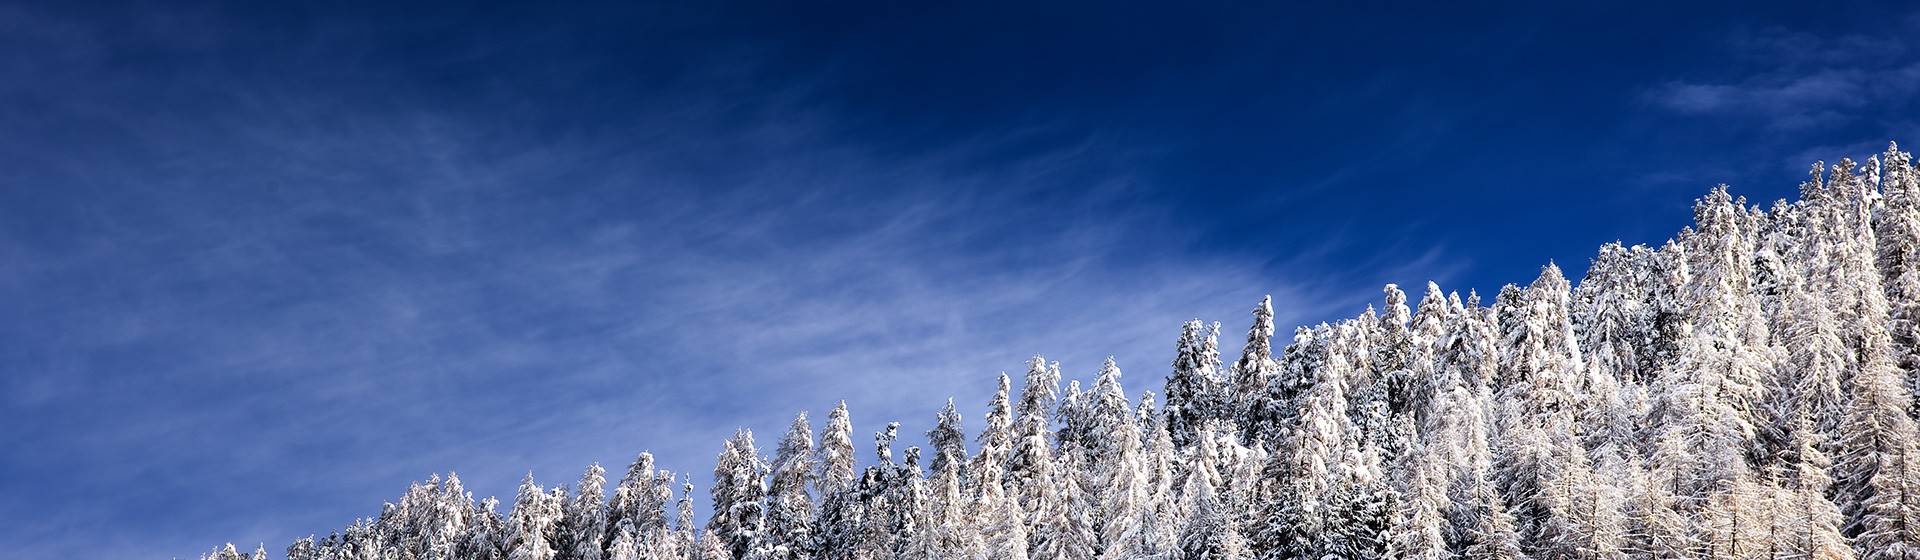 Snow-covered trees under a blue sky